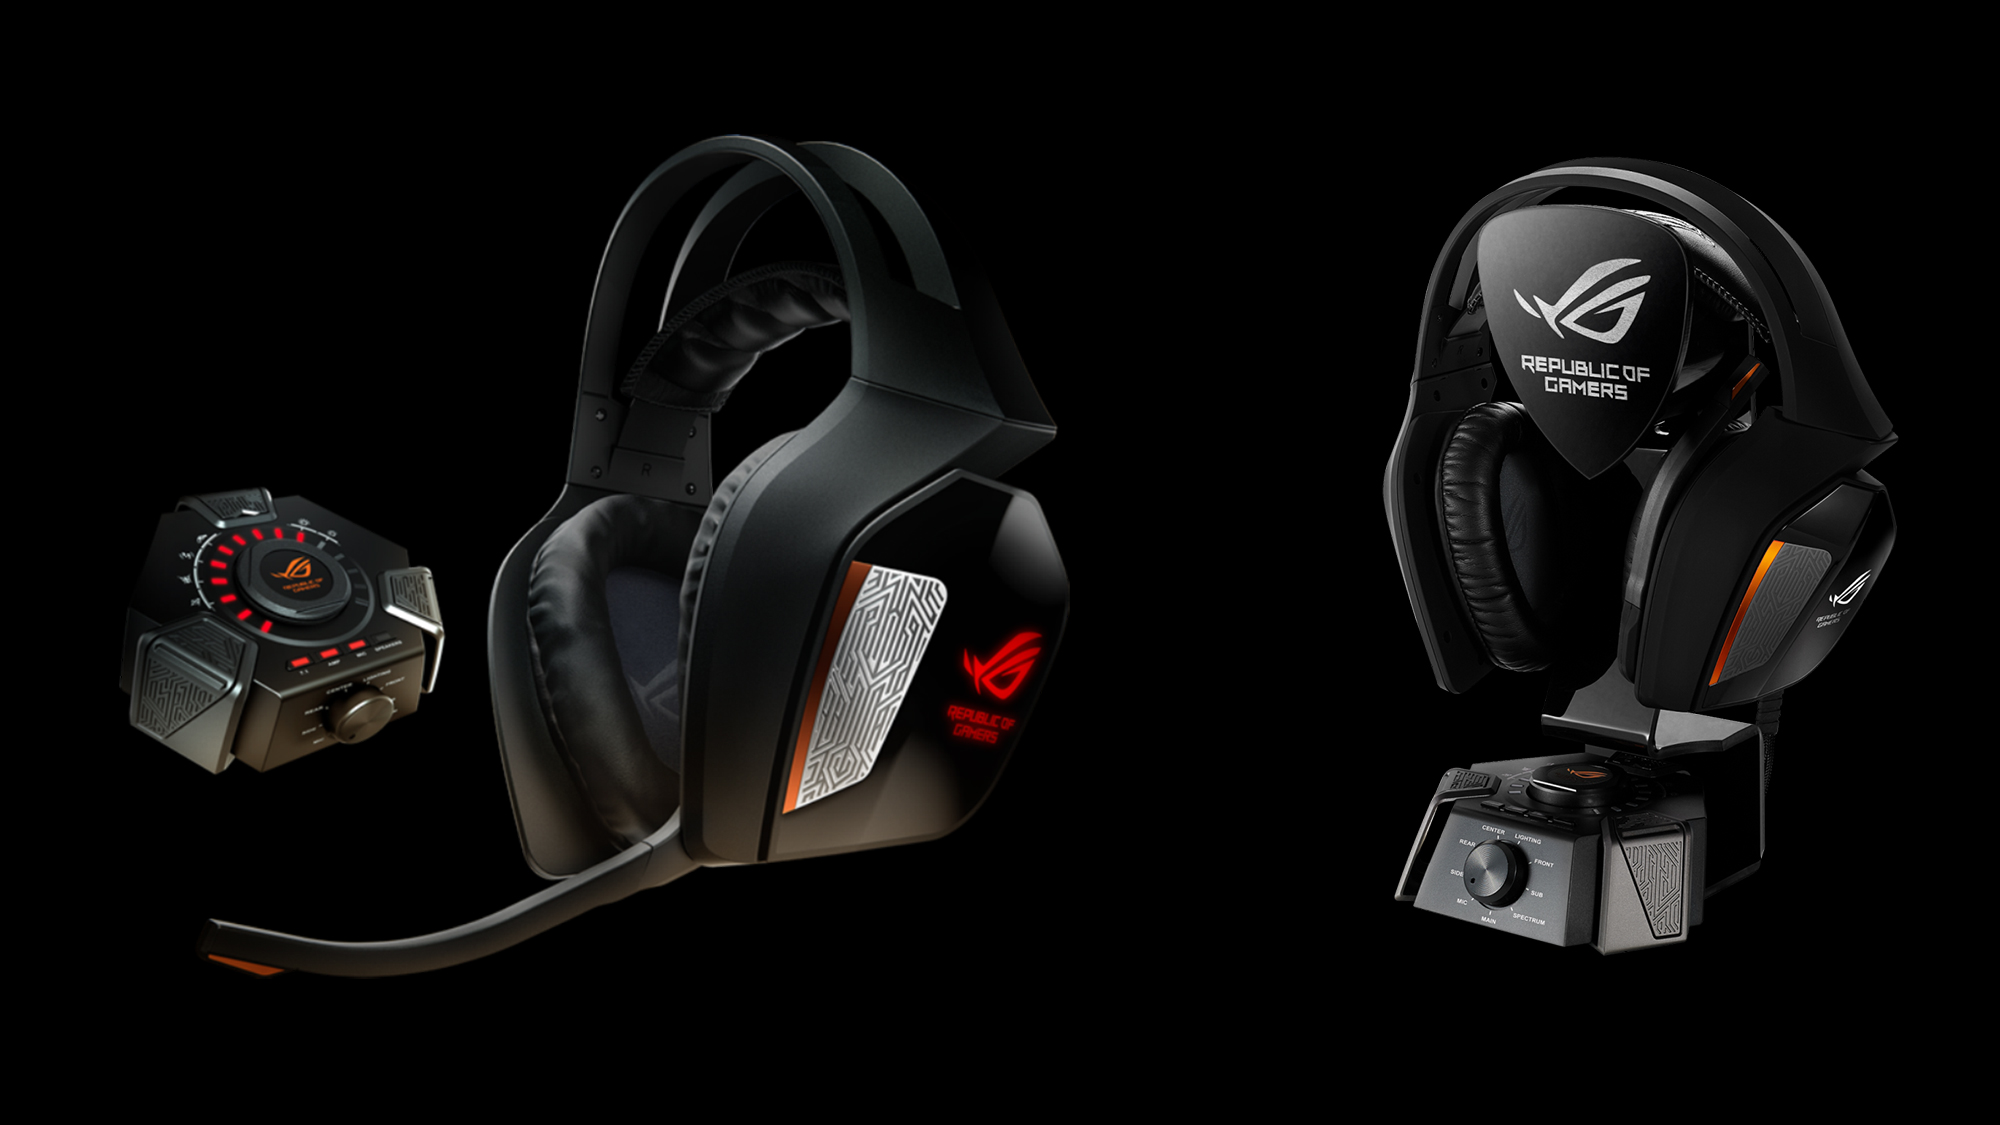 Republic of Gamers Announces Centurion True 7.1 Surround Gaming Headset |  ROG - Republic of Gamers Global